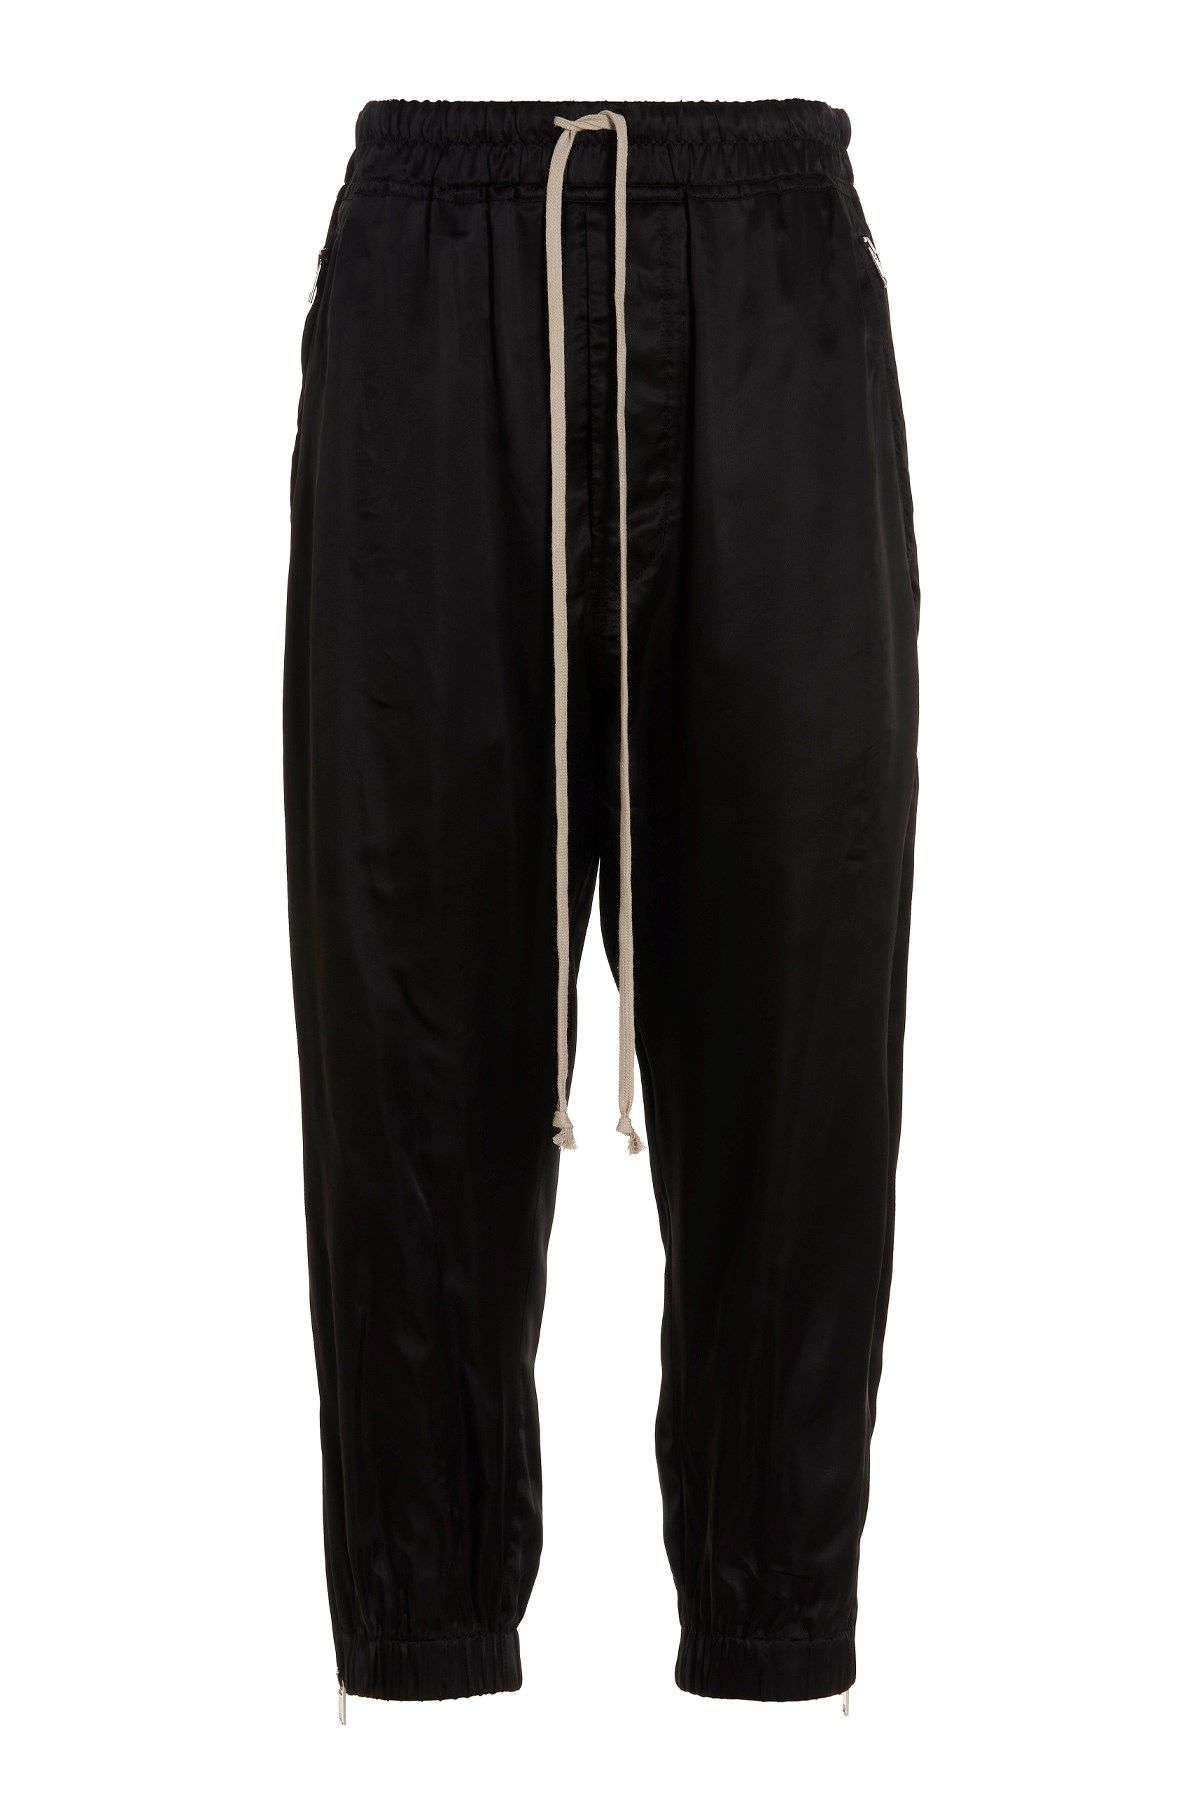 RICK OWENS 'Cropped Track’ Trousers